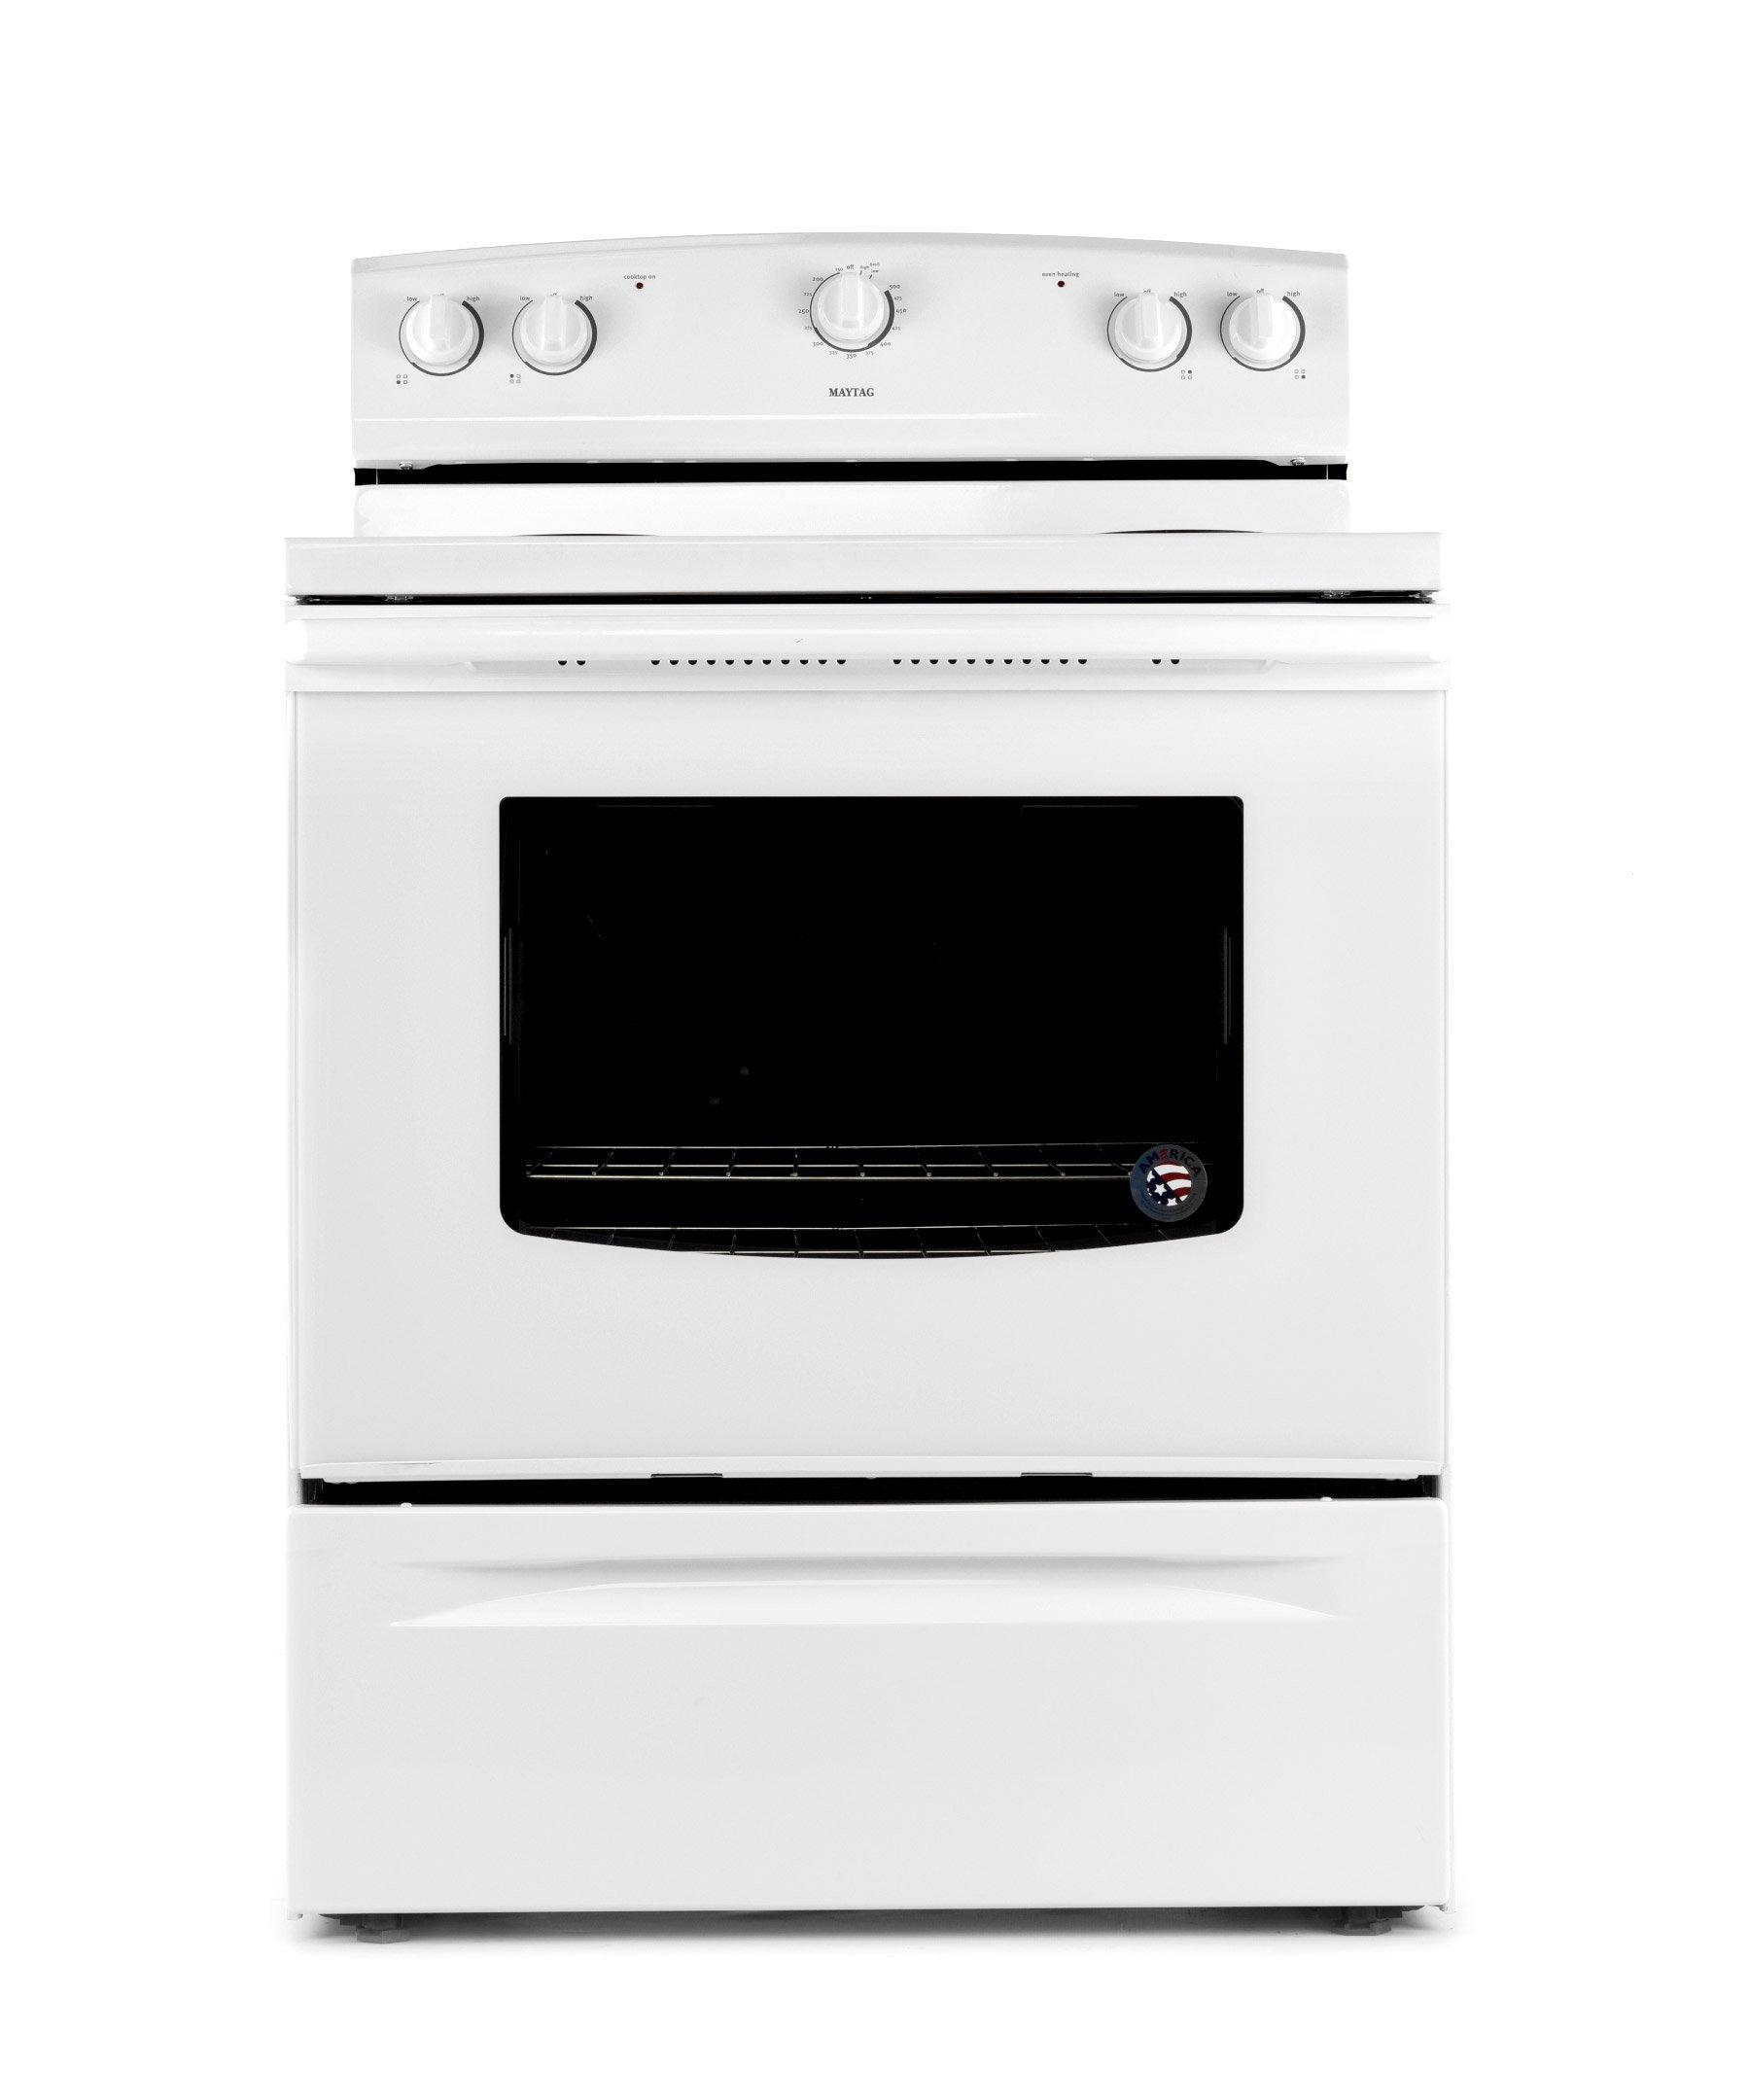 Buy Maytag Cooking Range, 4 Electric Burners, Coil Element, 220V 60Hz White Color in Saudi Arabia